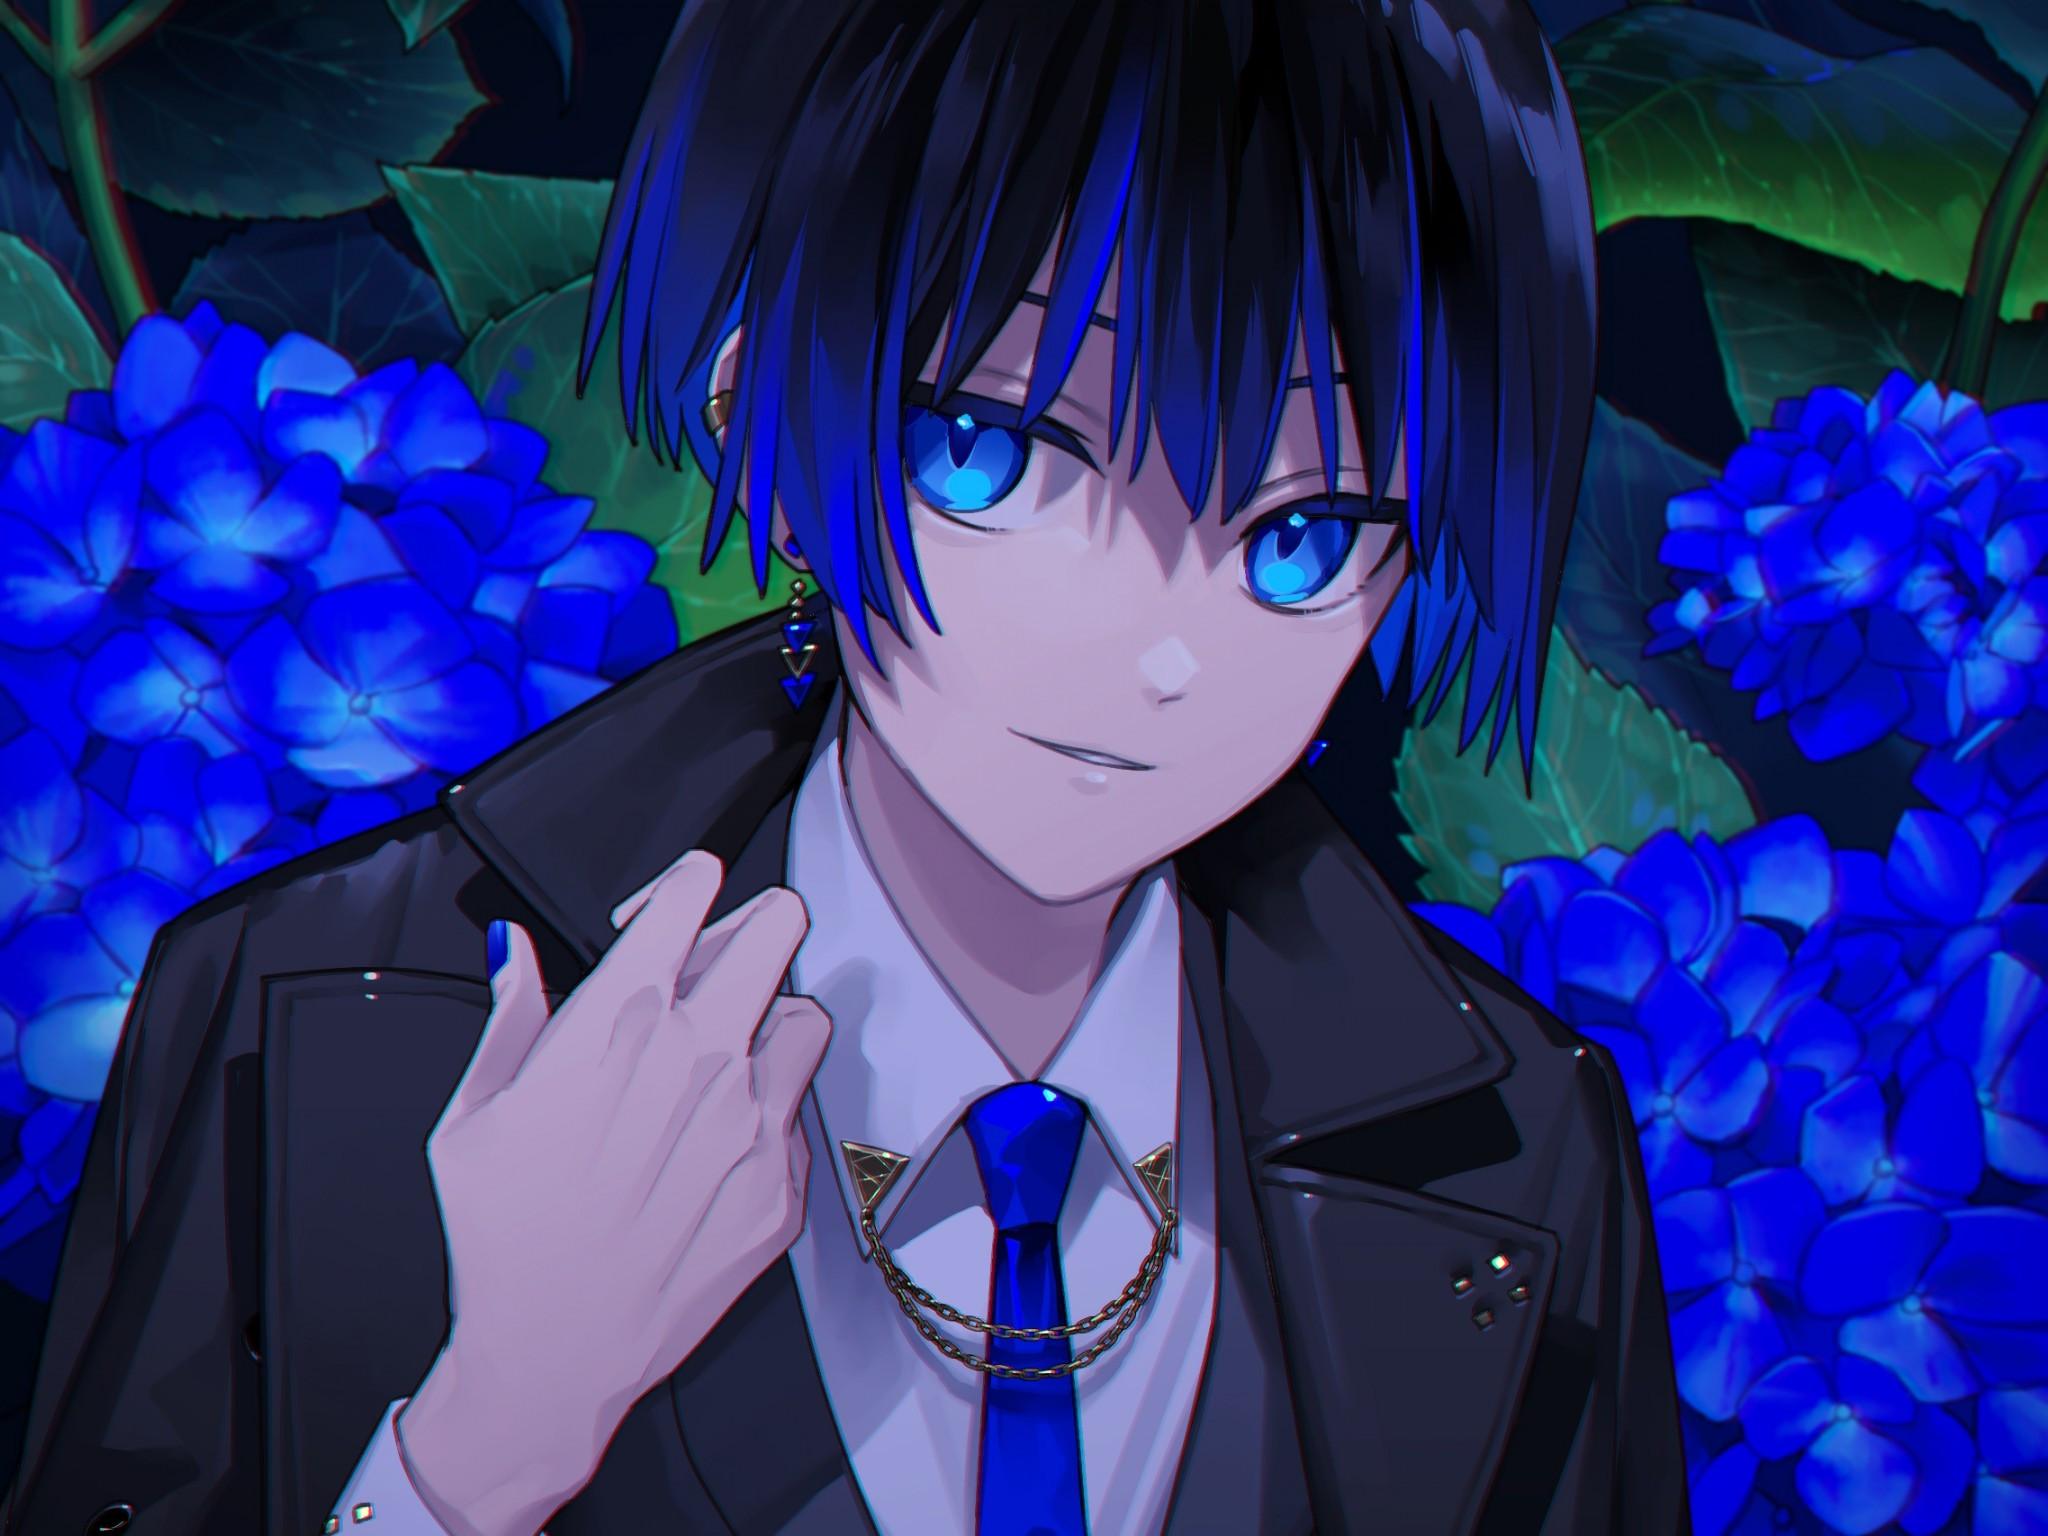 Cute Anime Boy with Blue Hair and Neko Features - wide 1